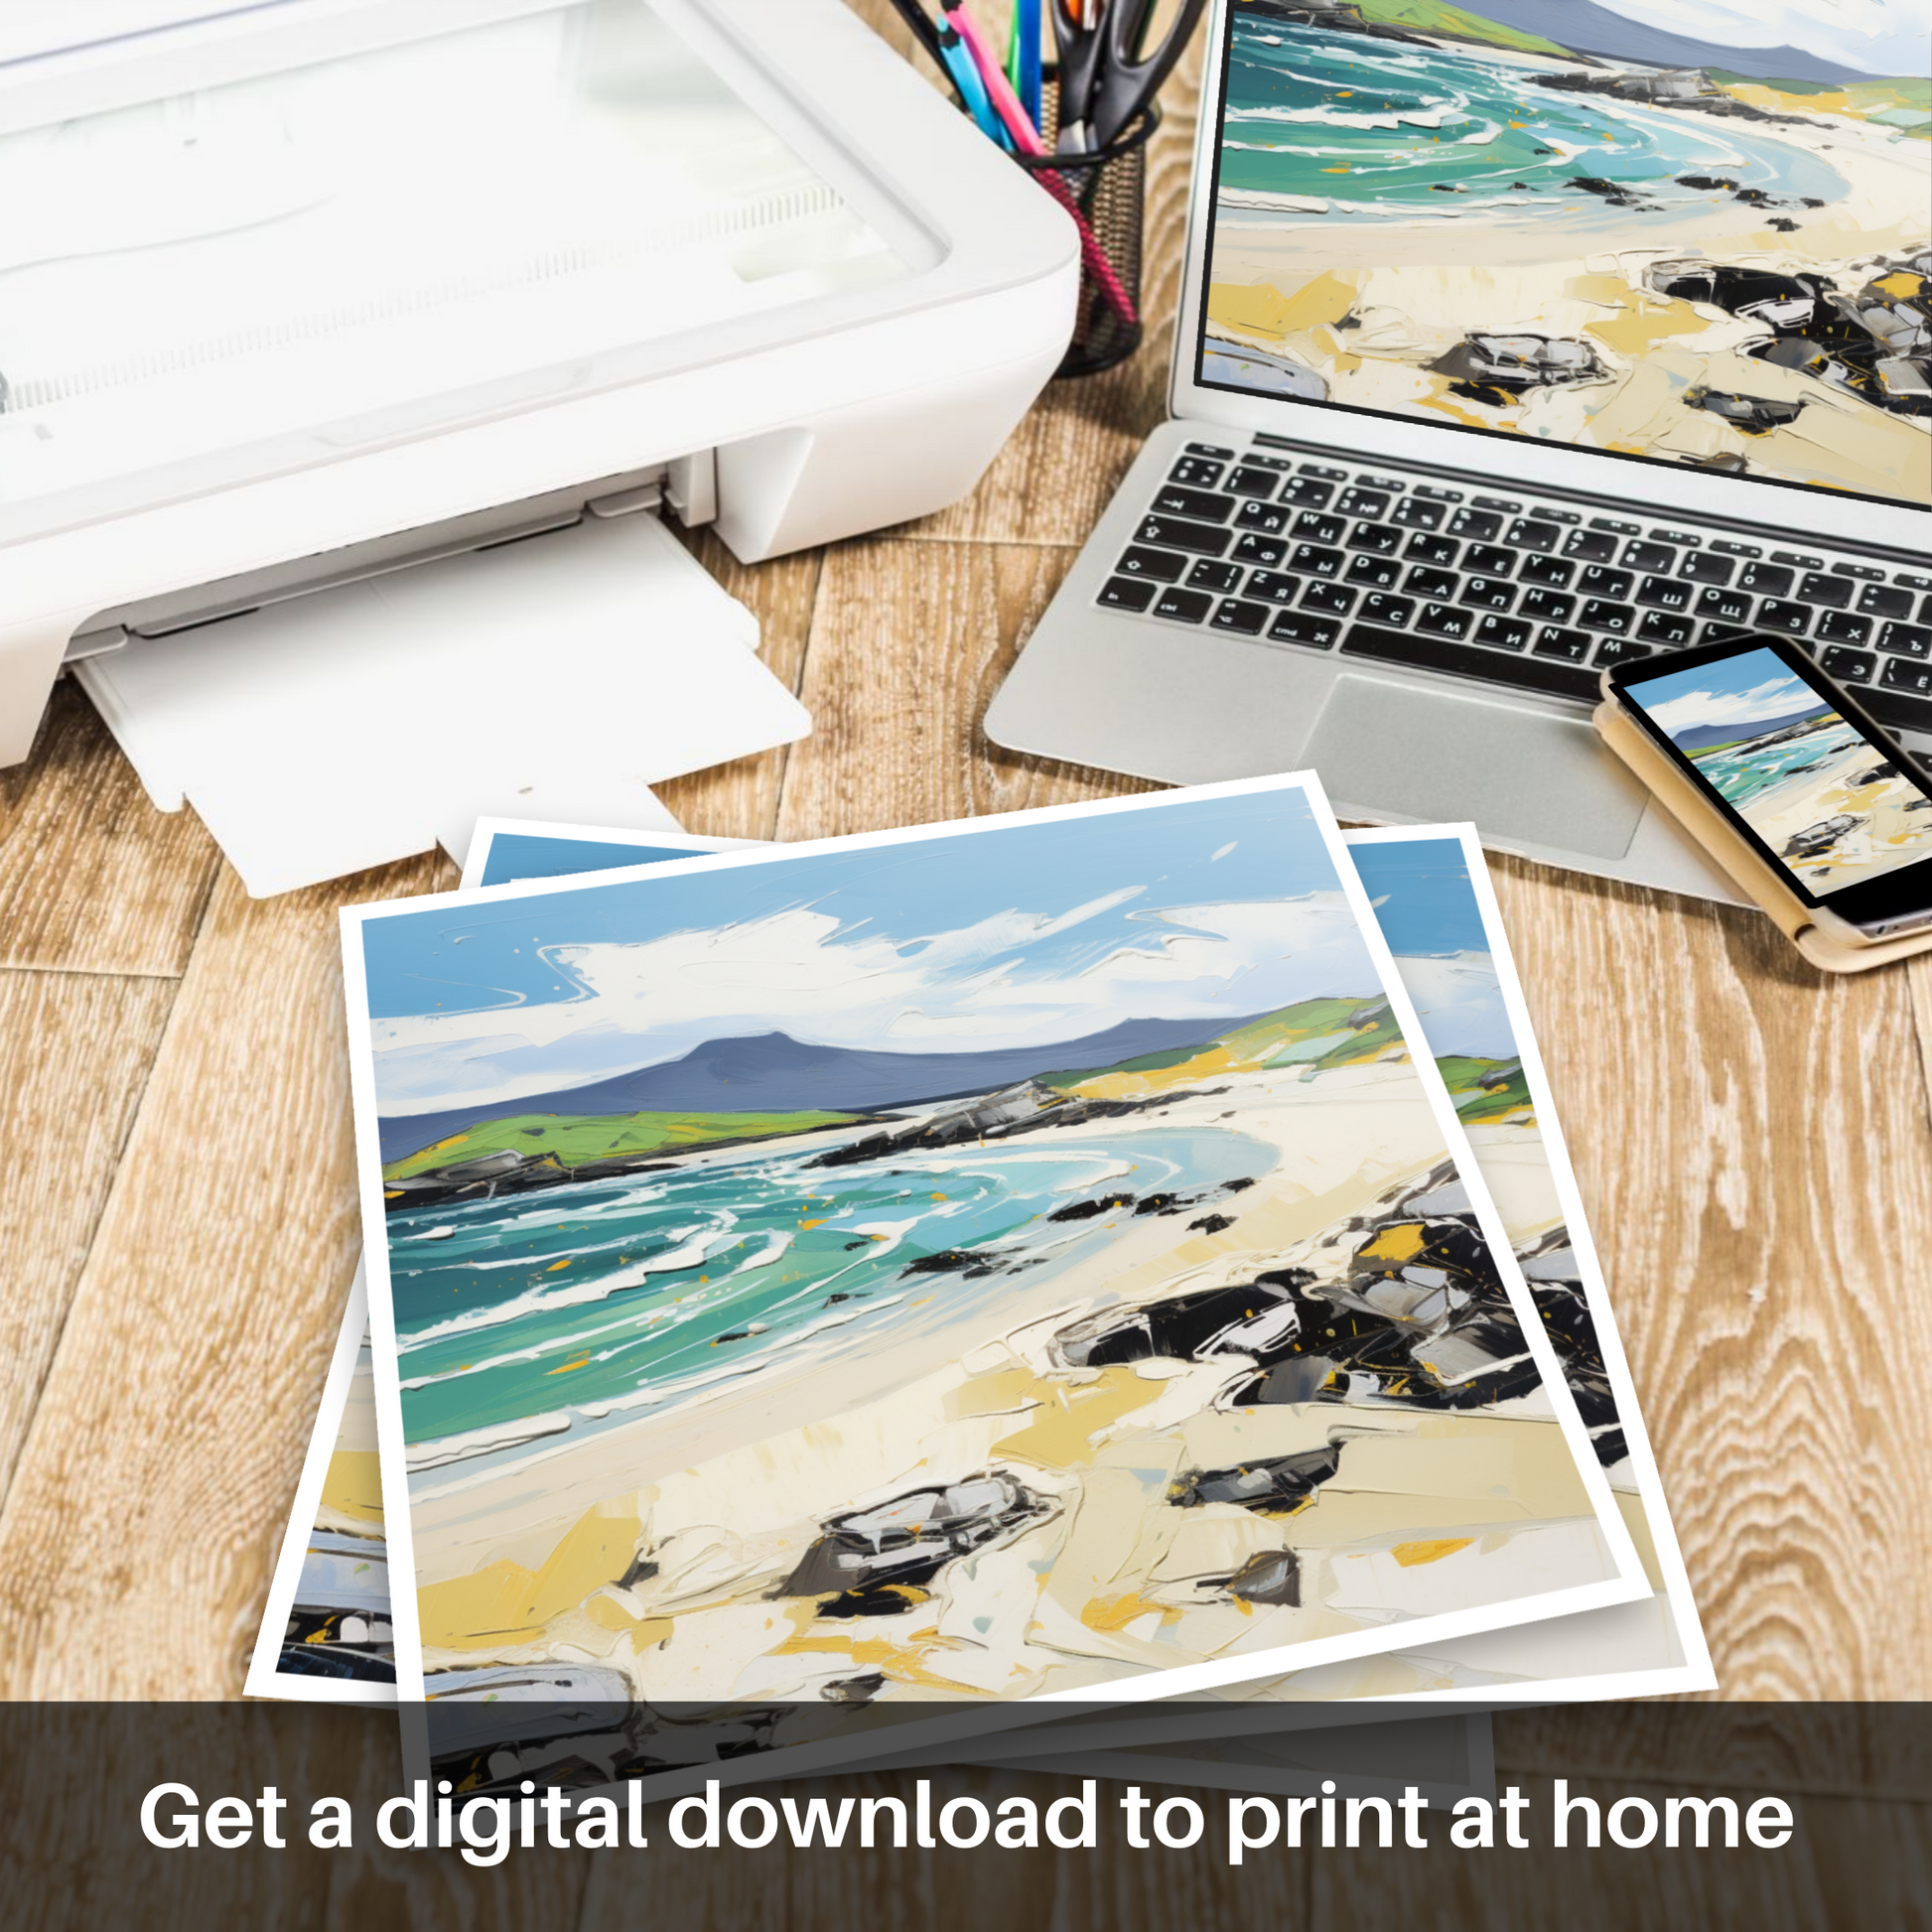 Downloadable and printable picture of Scarista Beach, Isle of Harris in summer